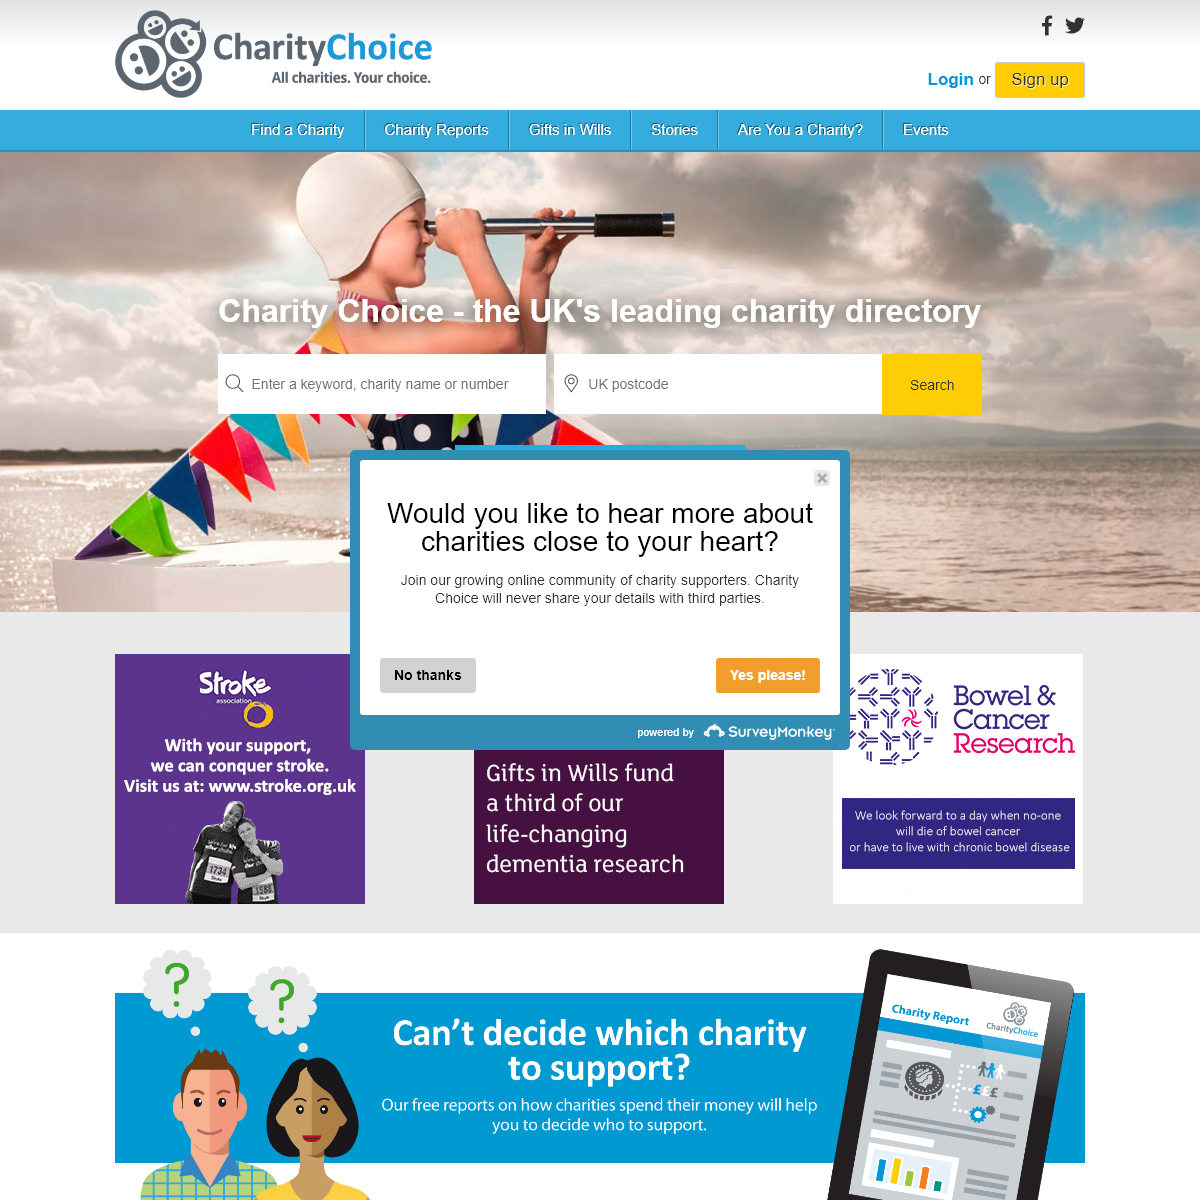 A complete backup of charitychoice.co.uk